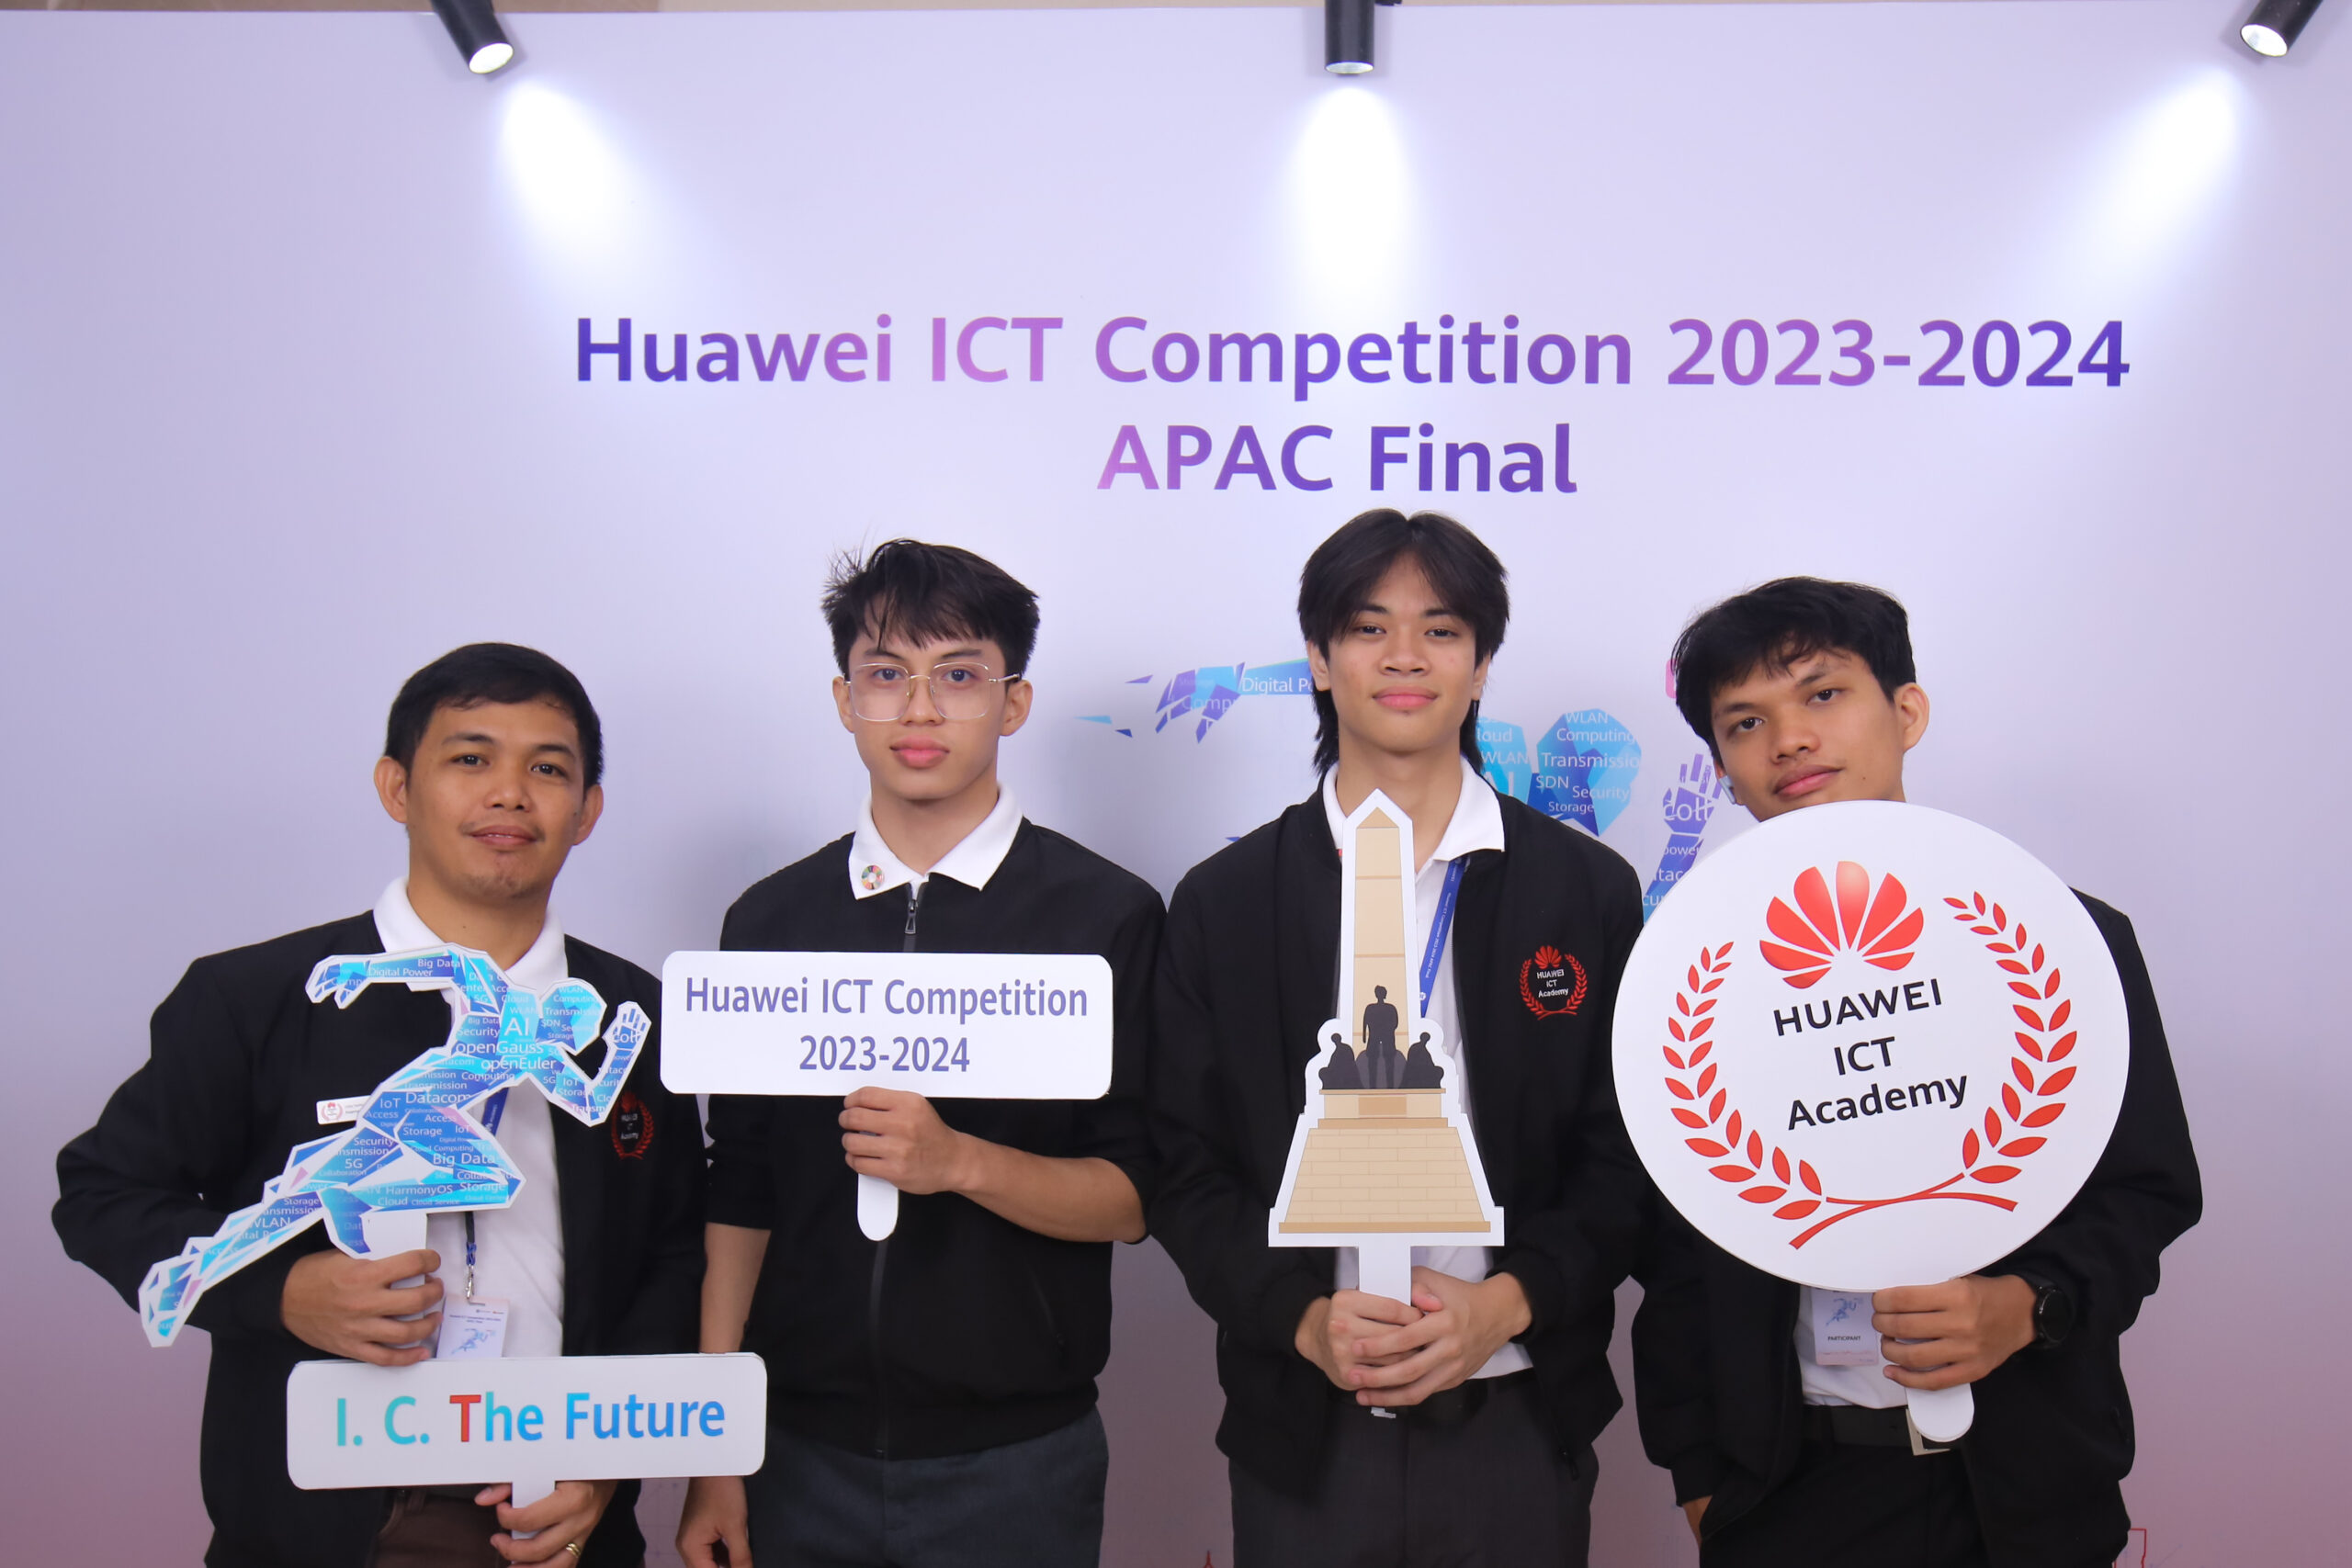 CIT University's College of Computer Studies students were recognized as Asia Pacific Champions in Huawei ICT Competition